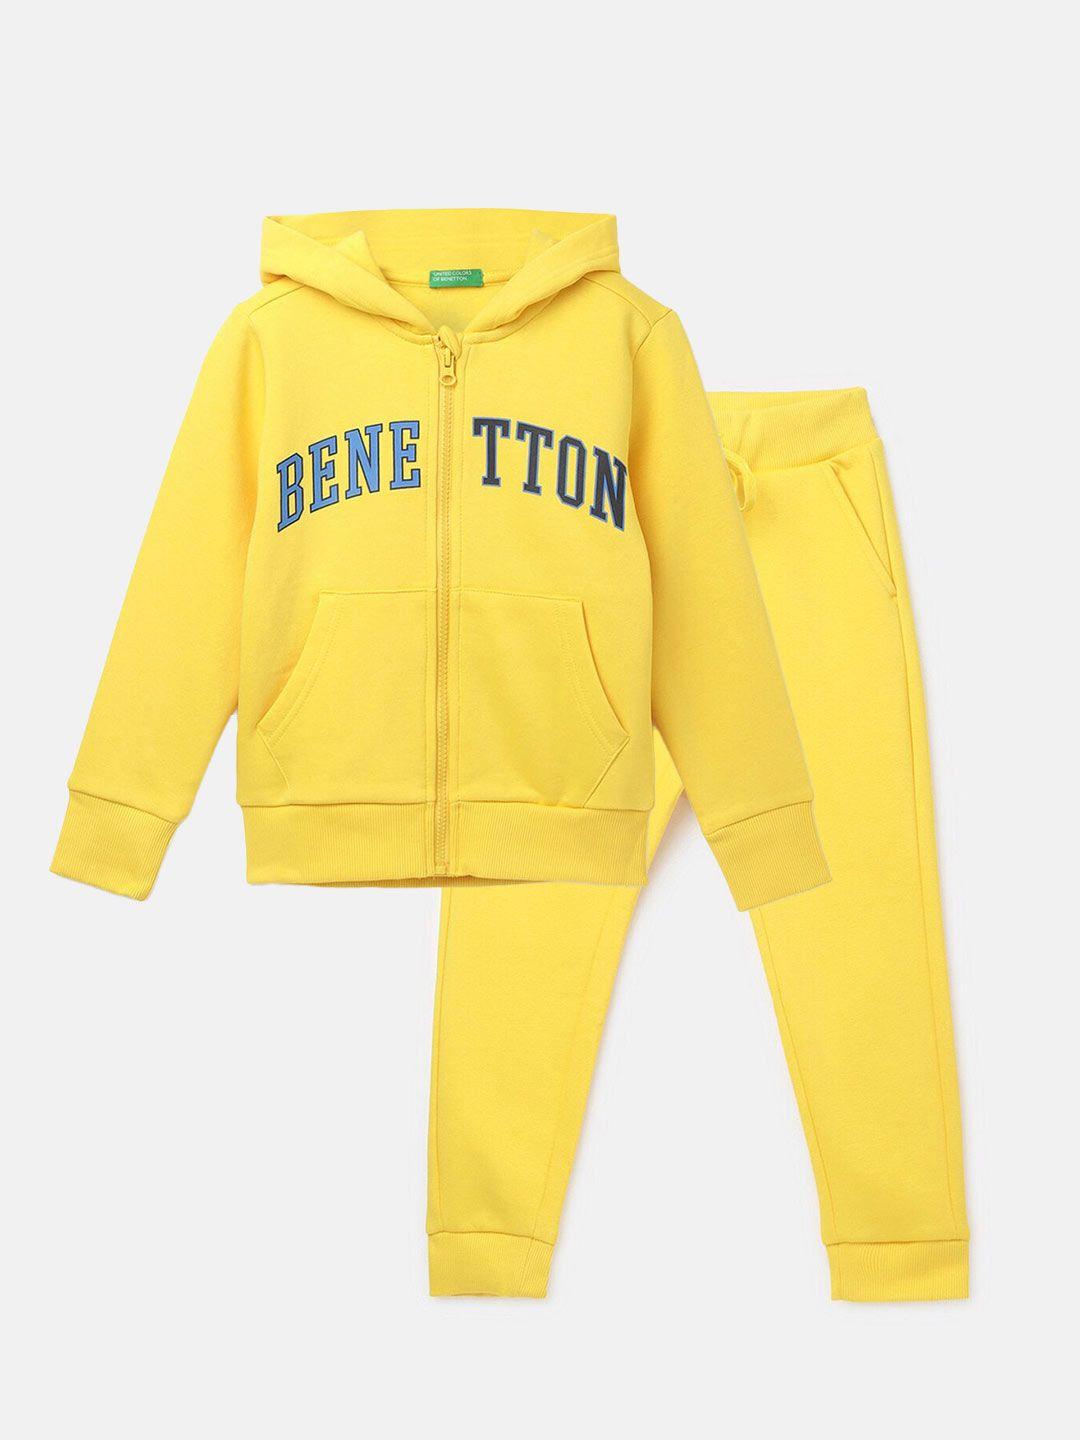 united colors of benetton boys typography printed hooded sweatshirt and joggers